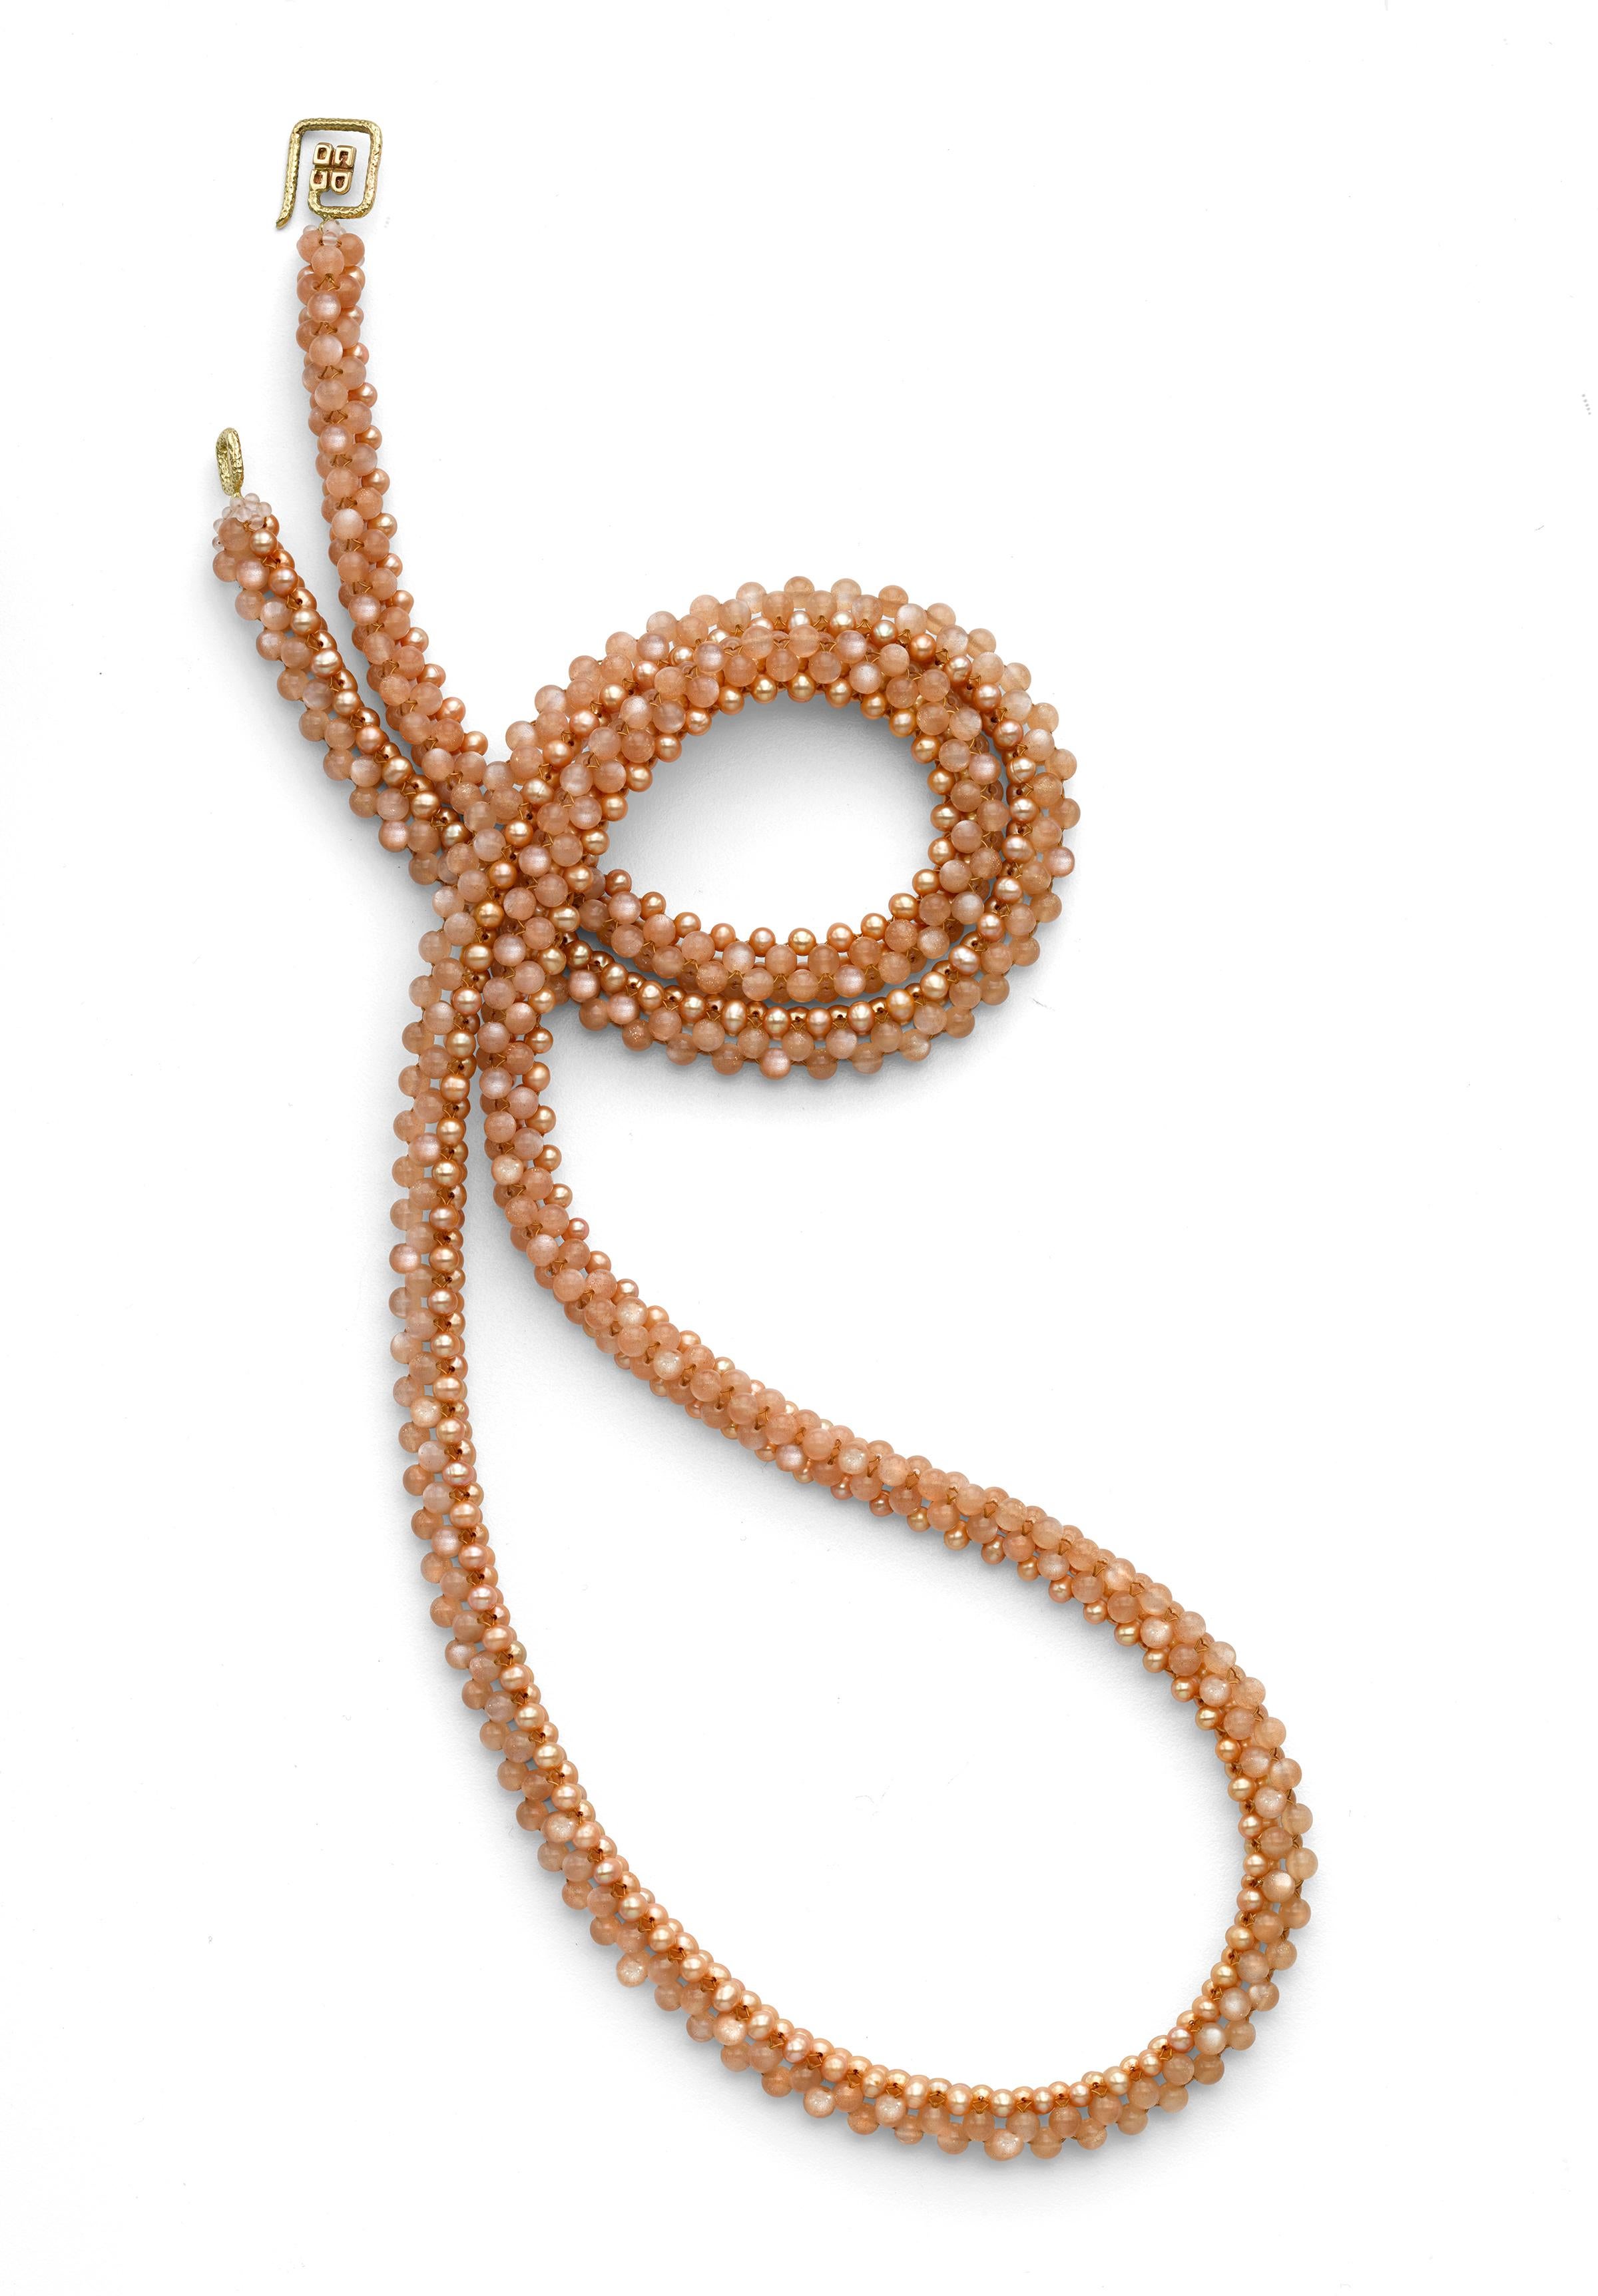 Long Beaded Rope Tassel Necklace woven of pink pearls and peach moonstone with 18K white gold clasp. Adjustable to be worn doubled up or long both with and without the tassel for a total of 4 distinct looks.  Easily transitioning from day to night,